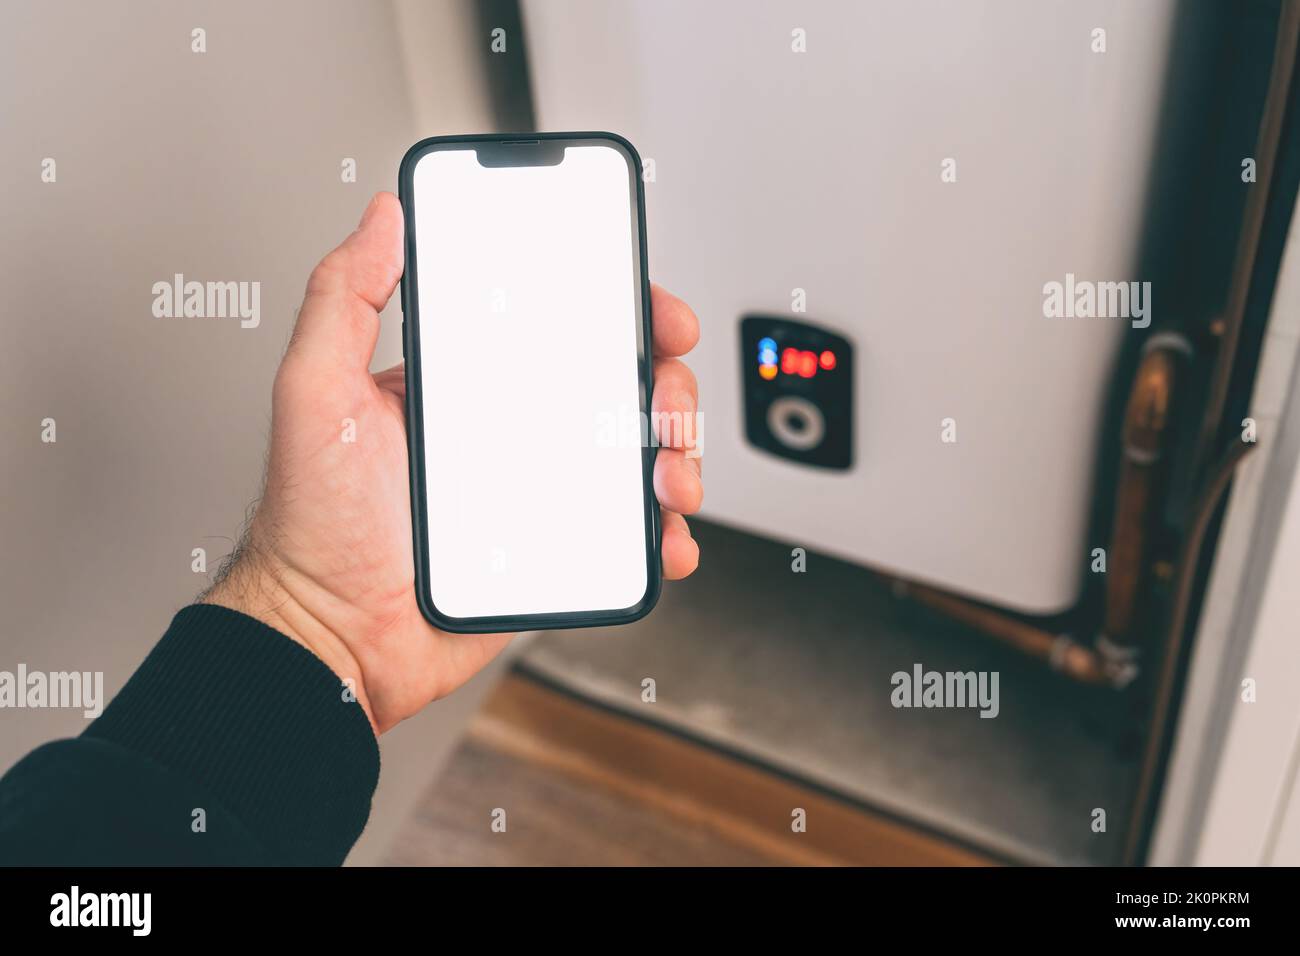 Smart home heating system, man holding smartphone with blank screen for Wi-Fi control app mockup, selective focus Stock Photo